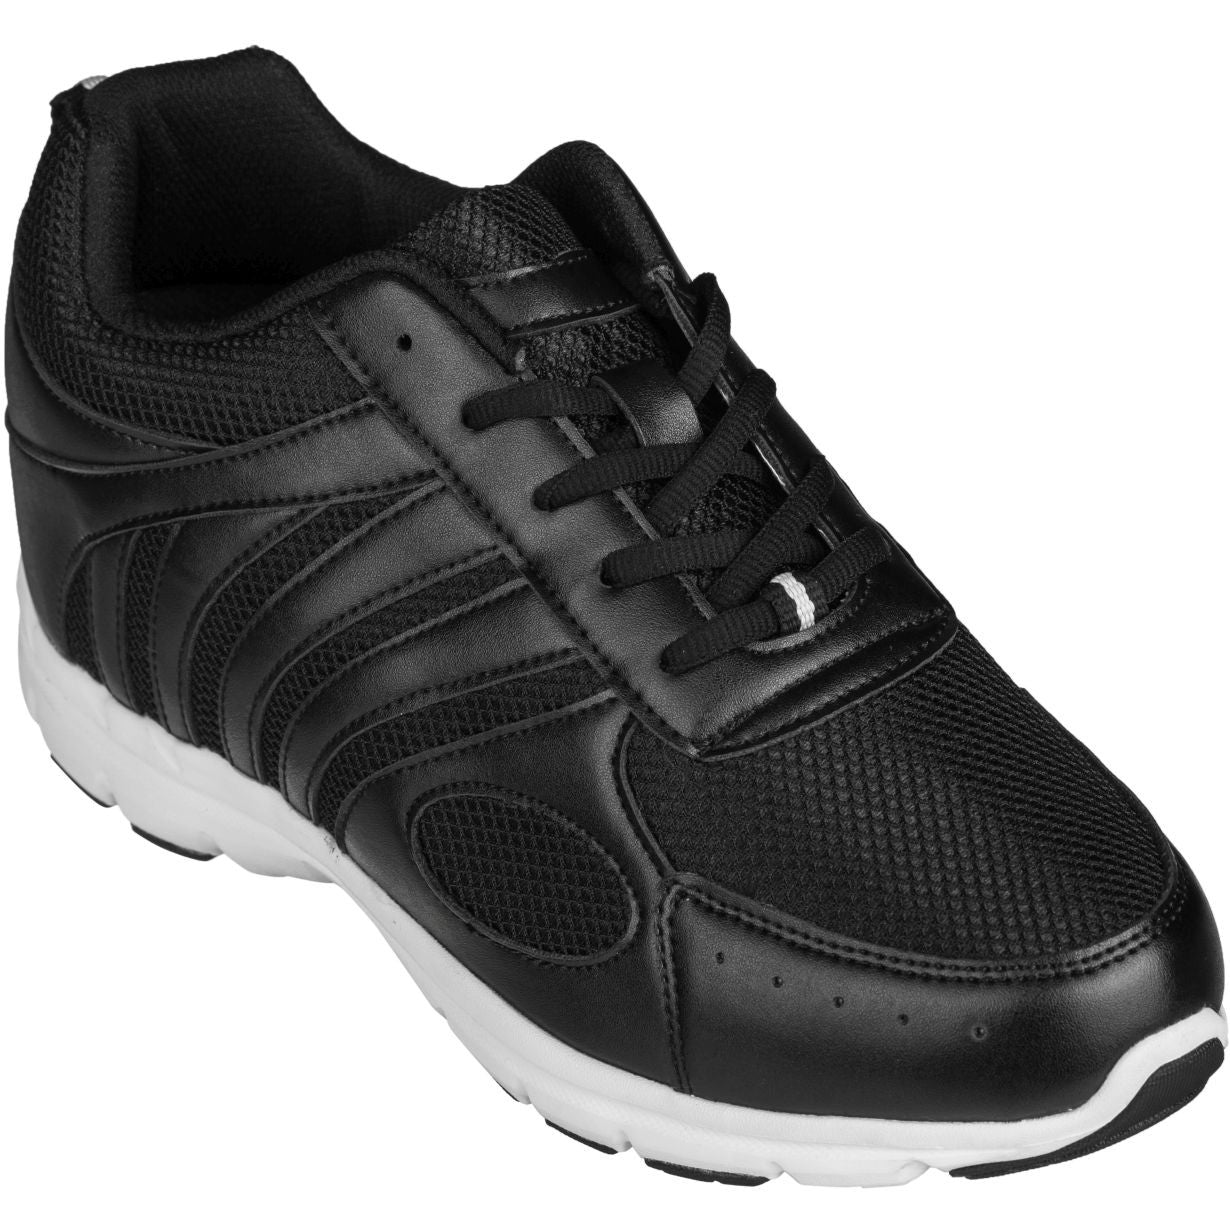 Elevator shoes height increase CALTO - G3304 - 3 Inches Taller (Black) - Super Lightweight